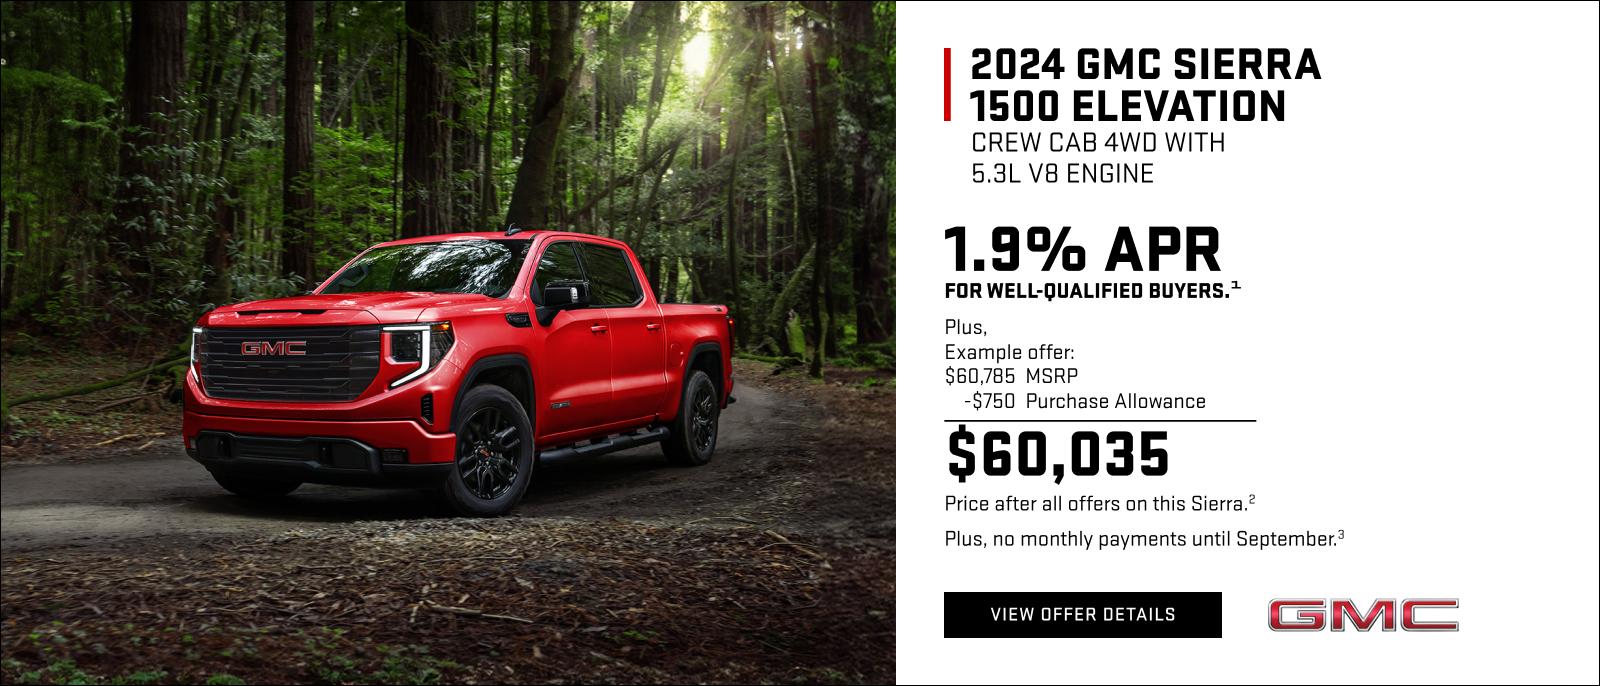 1.9% APR for well-qualified buyers.1

Plus,

Example offer:
$60,785 MSRP
$750 Purchase Allowance
$60,035 Price after all offers on this Sierra.2

Plus, no monthly payments until September.3